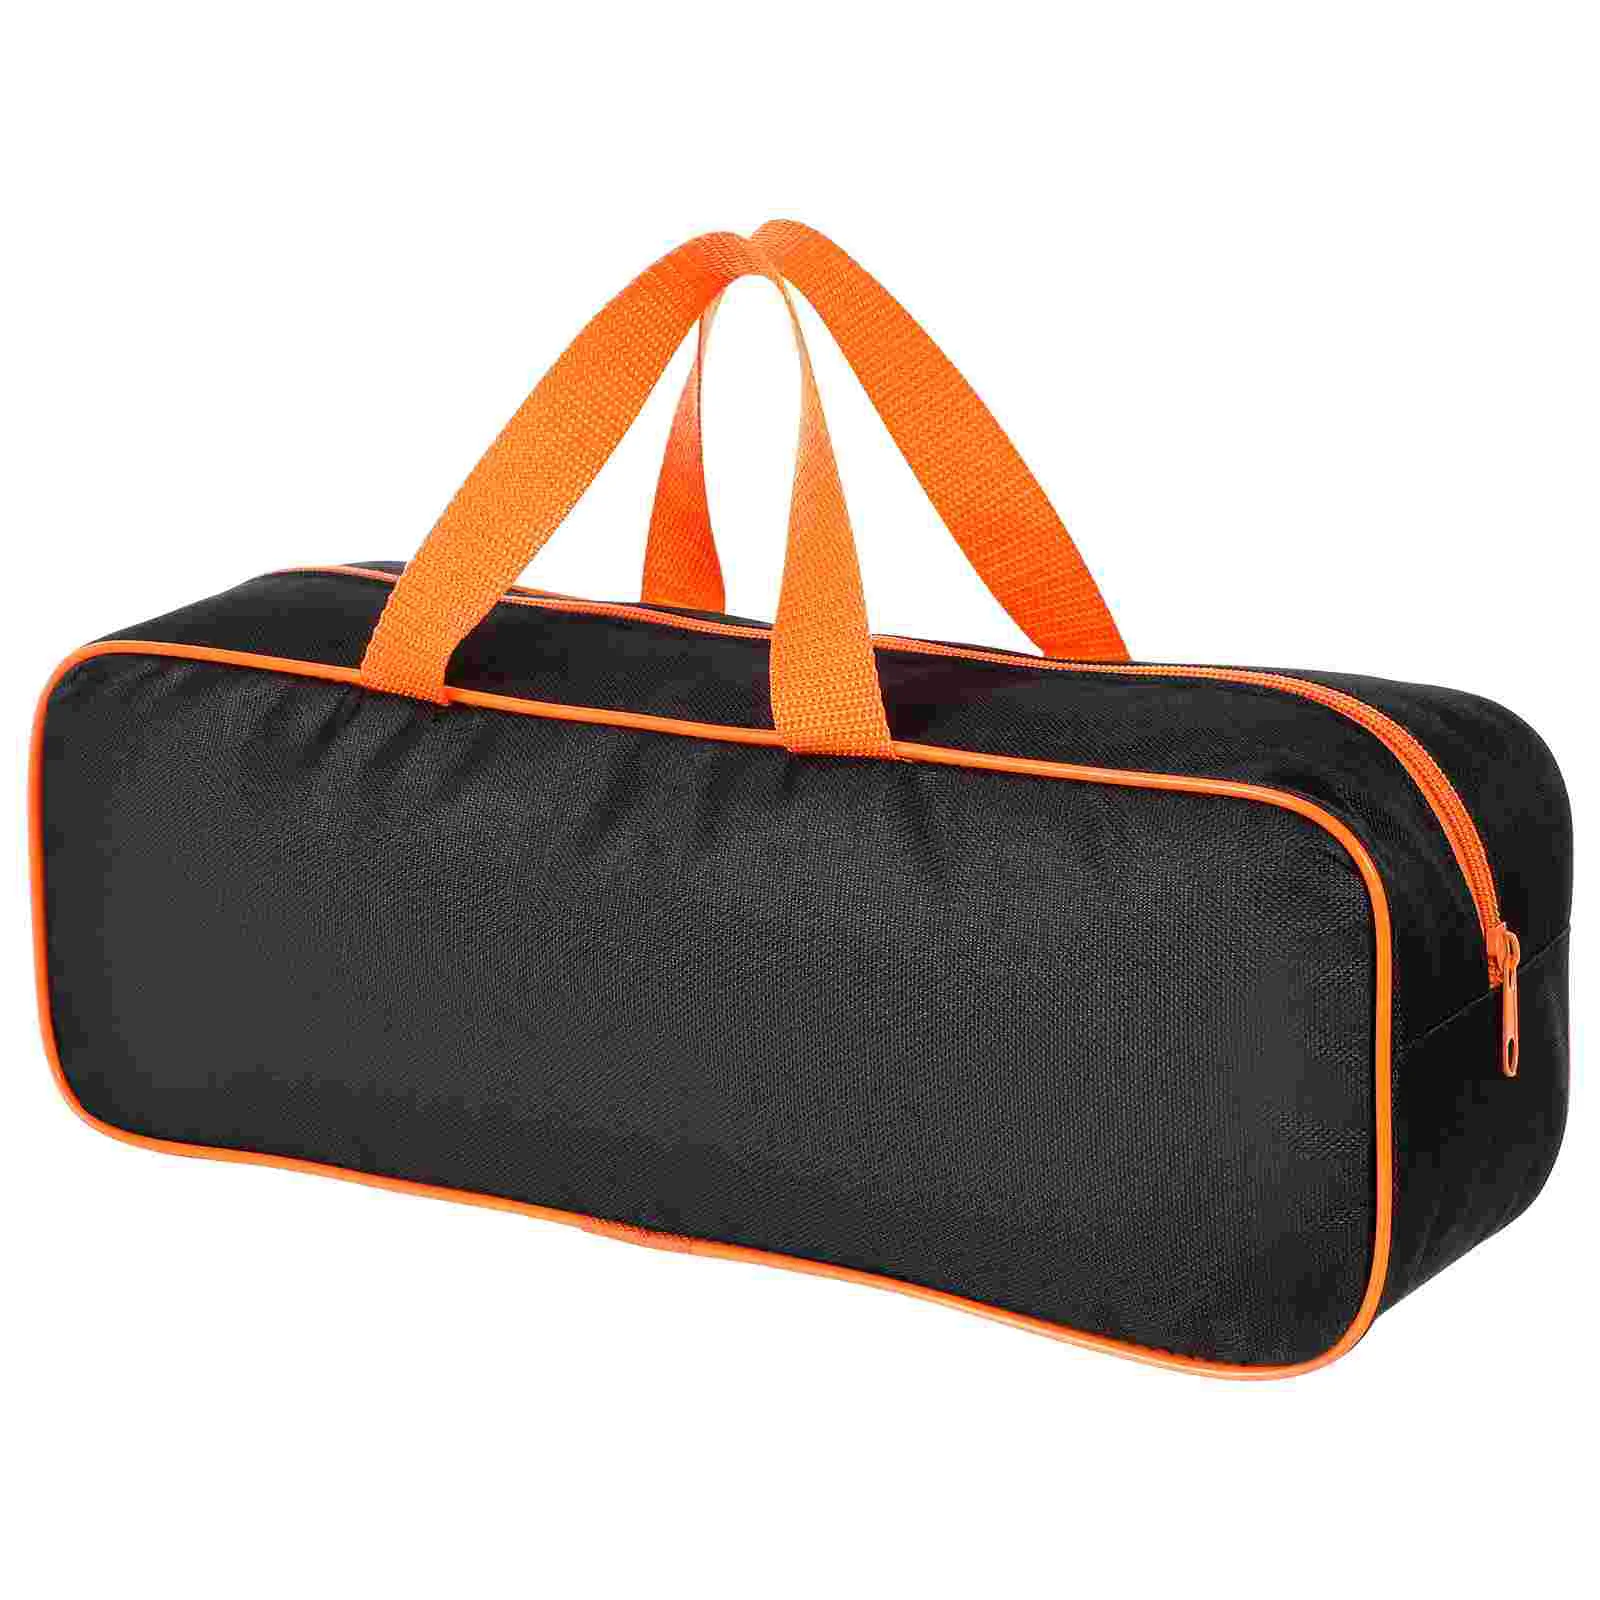 

Tool Storage Bag Barbecue Accessories Carry Grill Tools Bags Camping Picnic Portable Outdoor